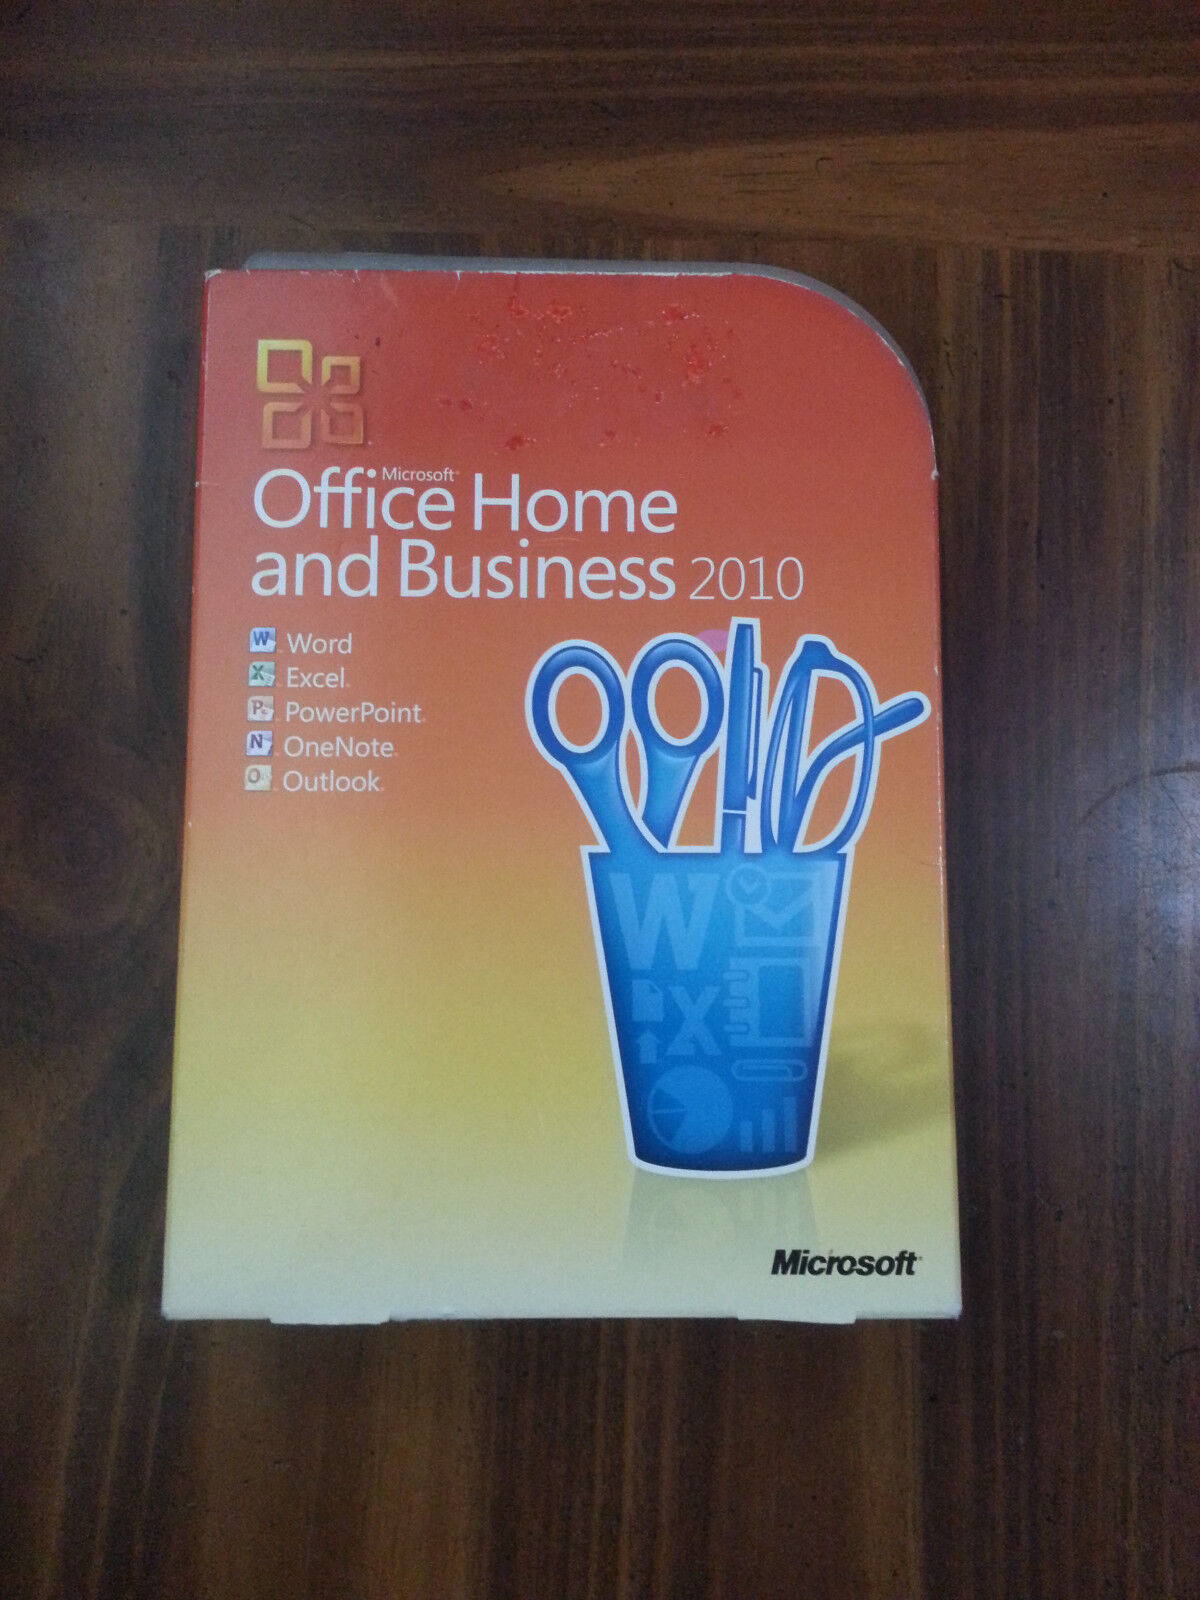 Microsoft Office Home and Business 2010 Full Version for 2 PCs RETAIL GENUINE 